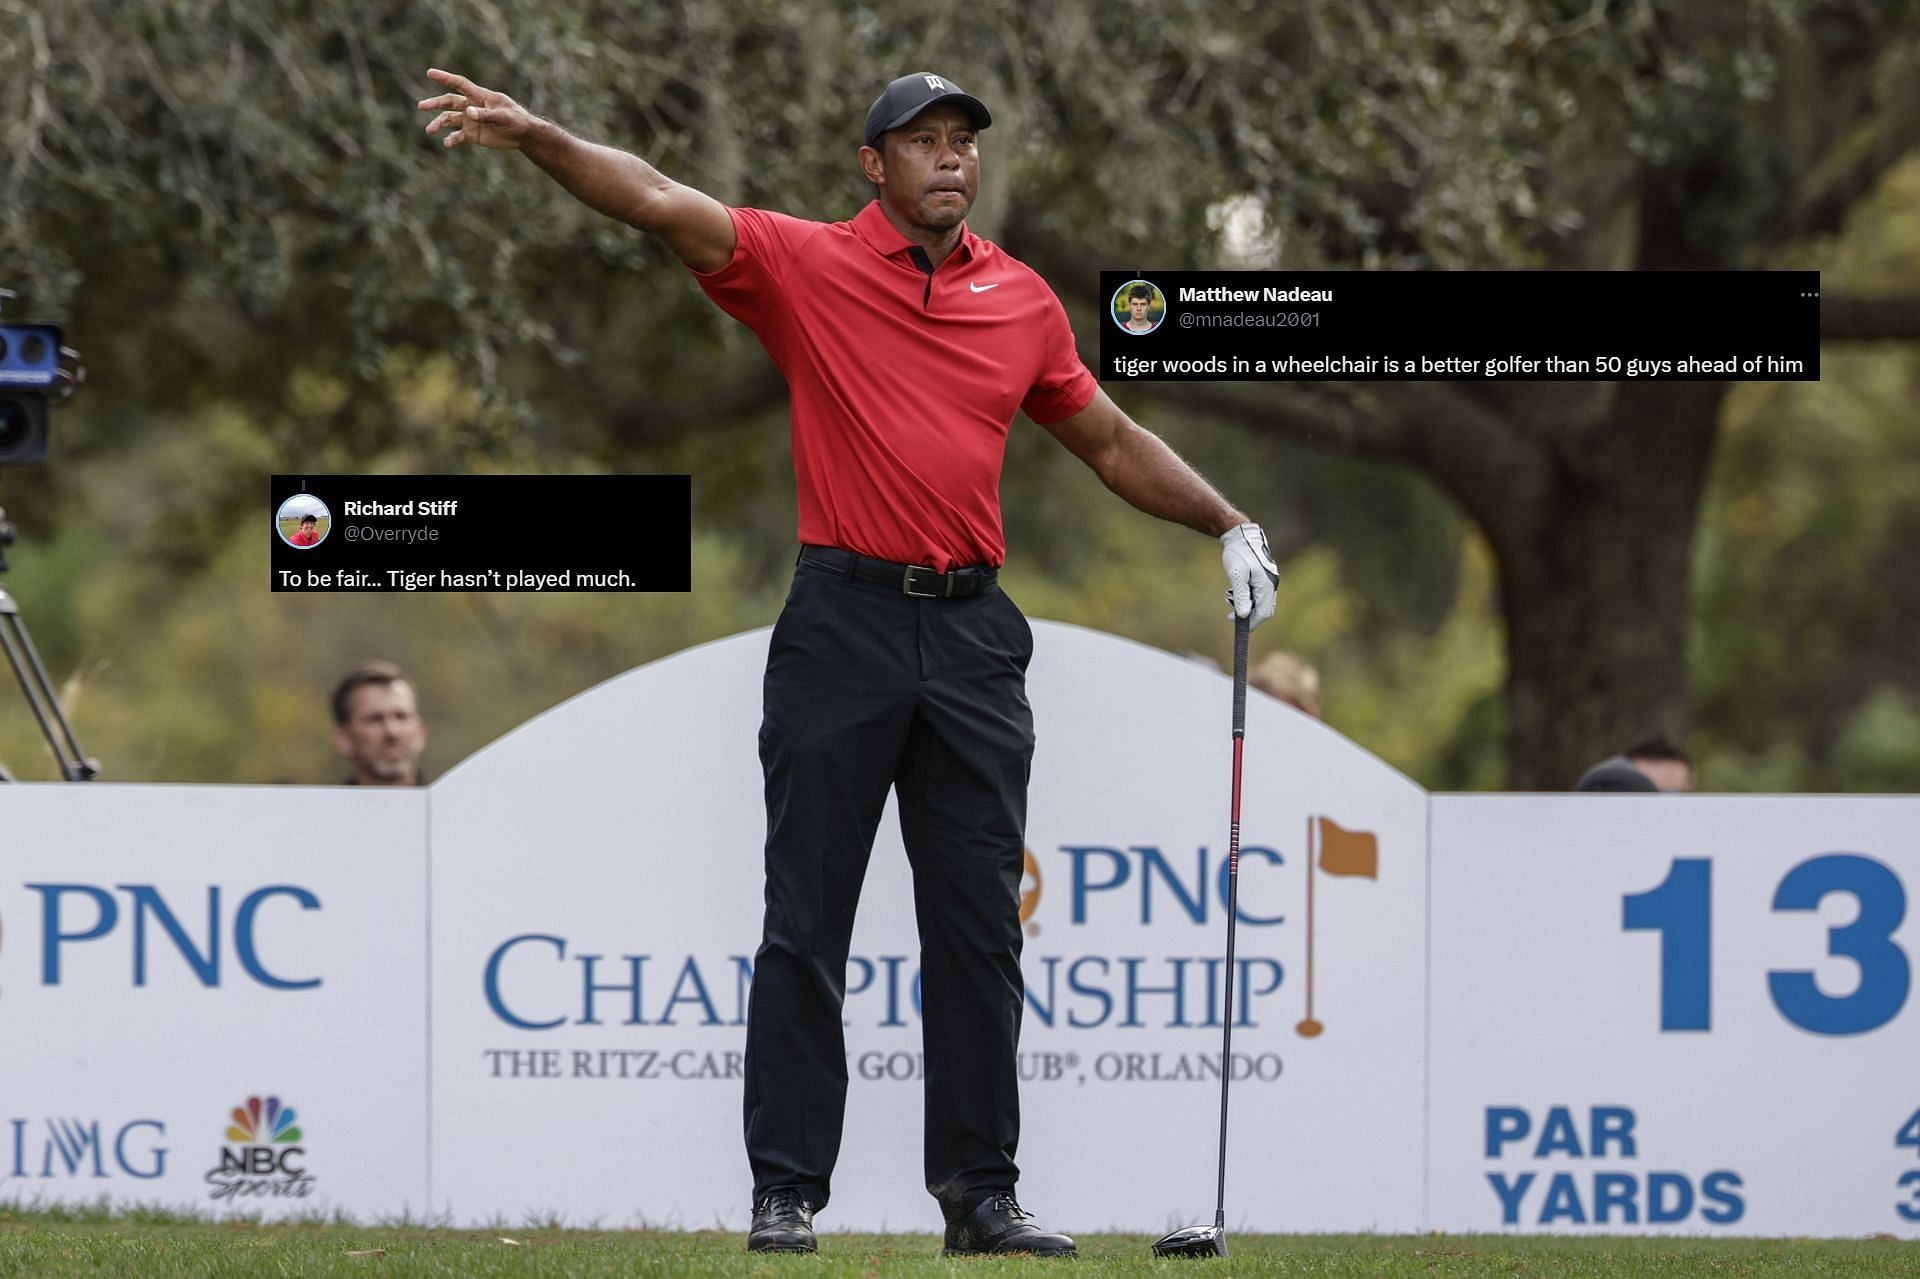 Tiger Woods is ranked 131st in PGA Tour fantasy rankings